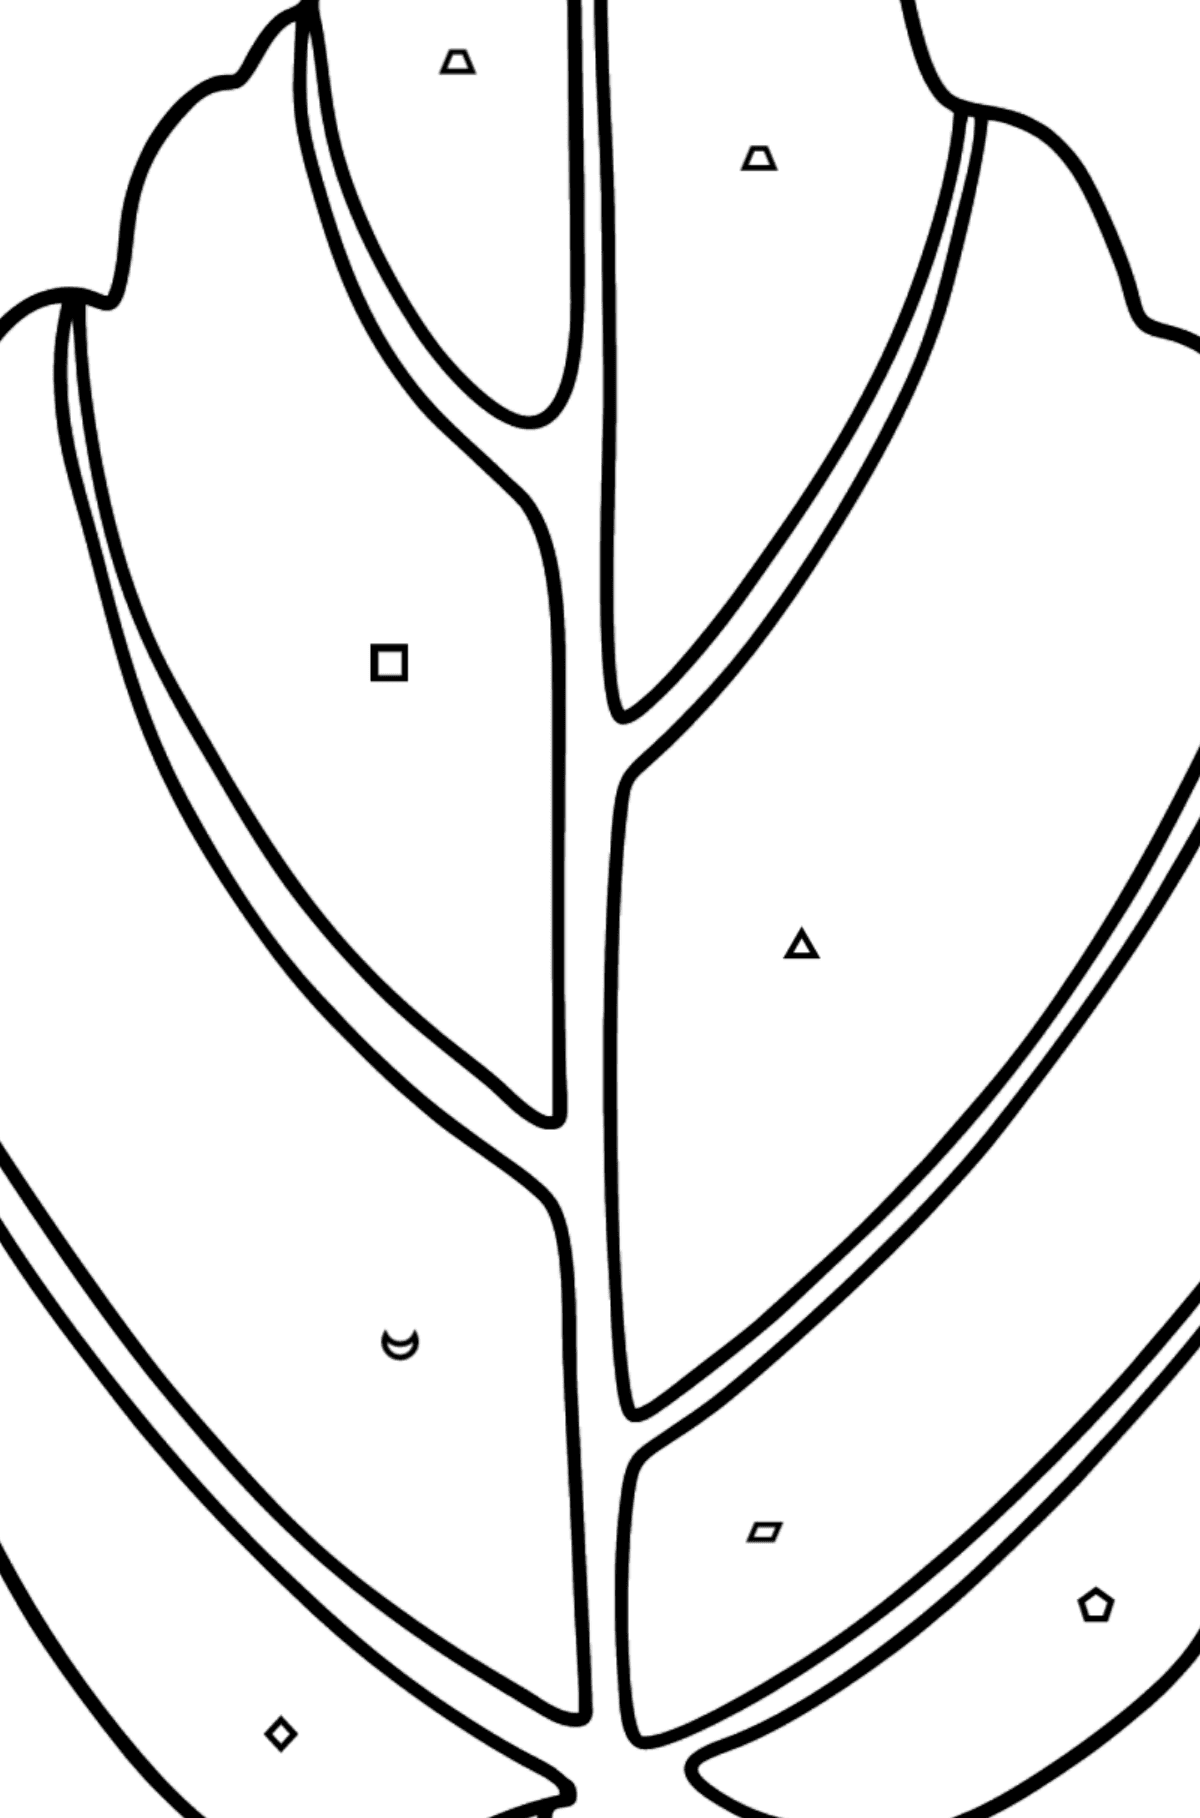 Hamamelis Leaf coloring page - Coloring by Geometric Shapes for Kids